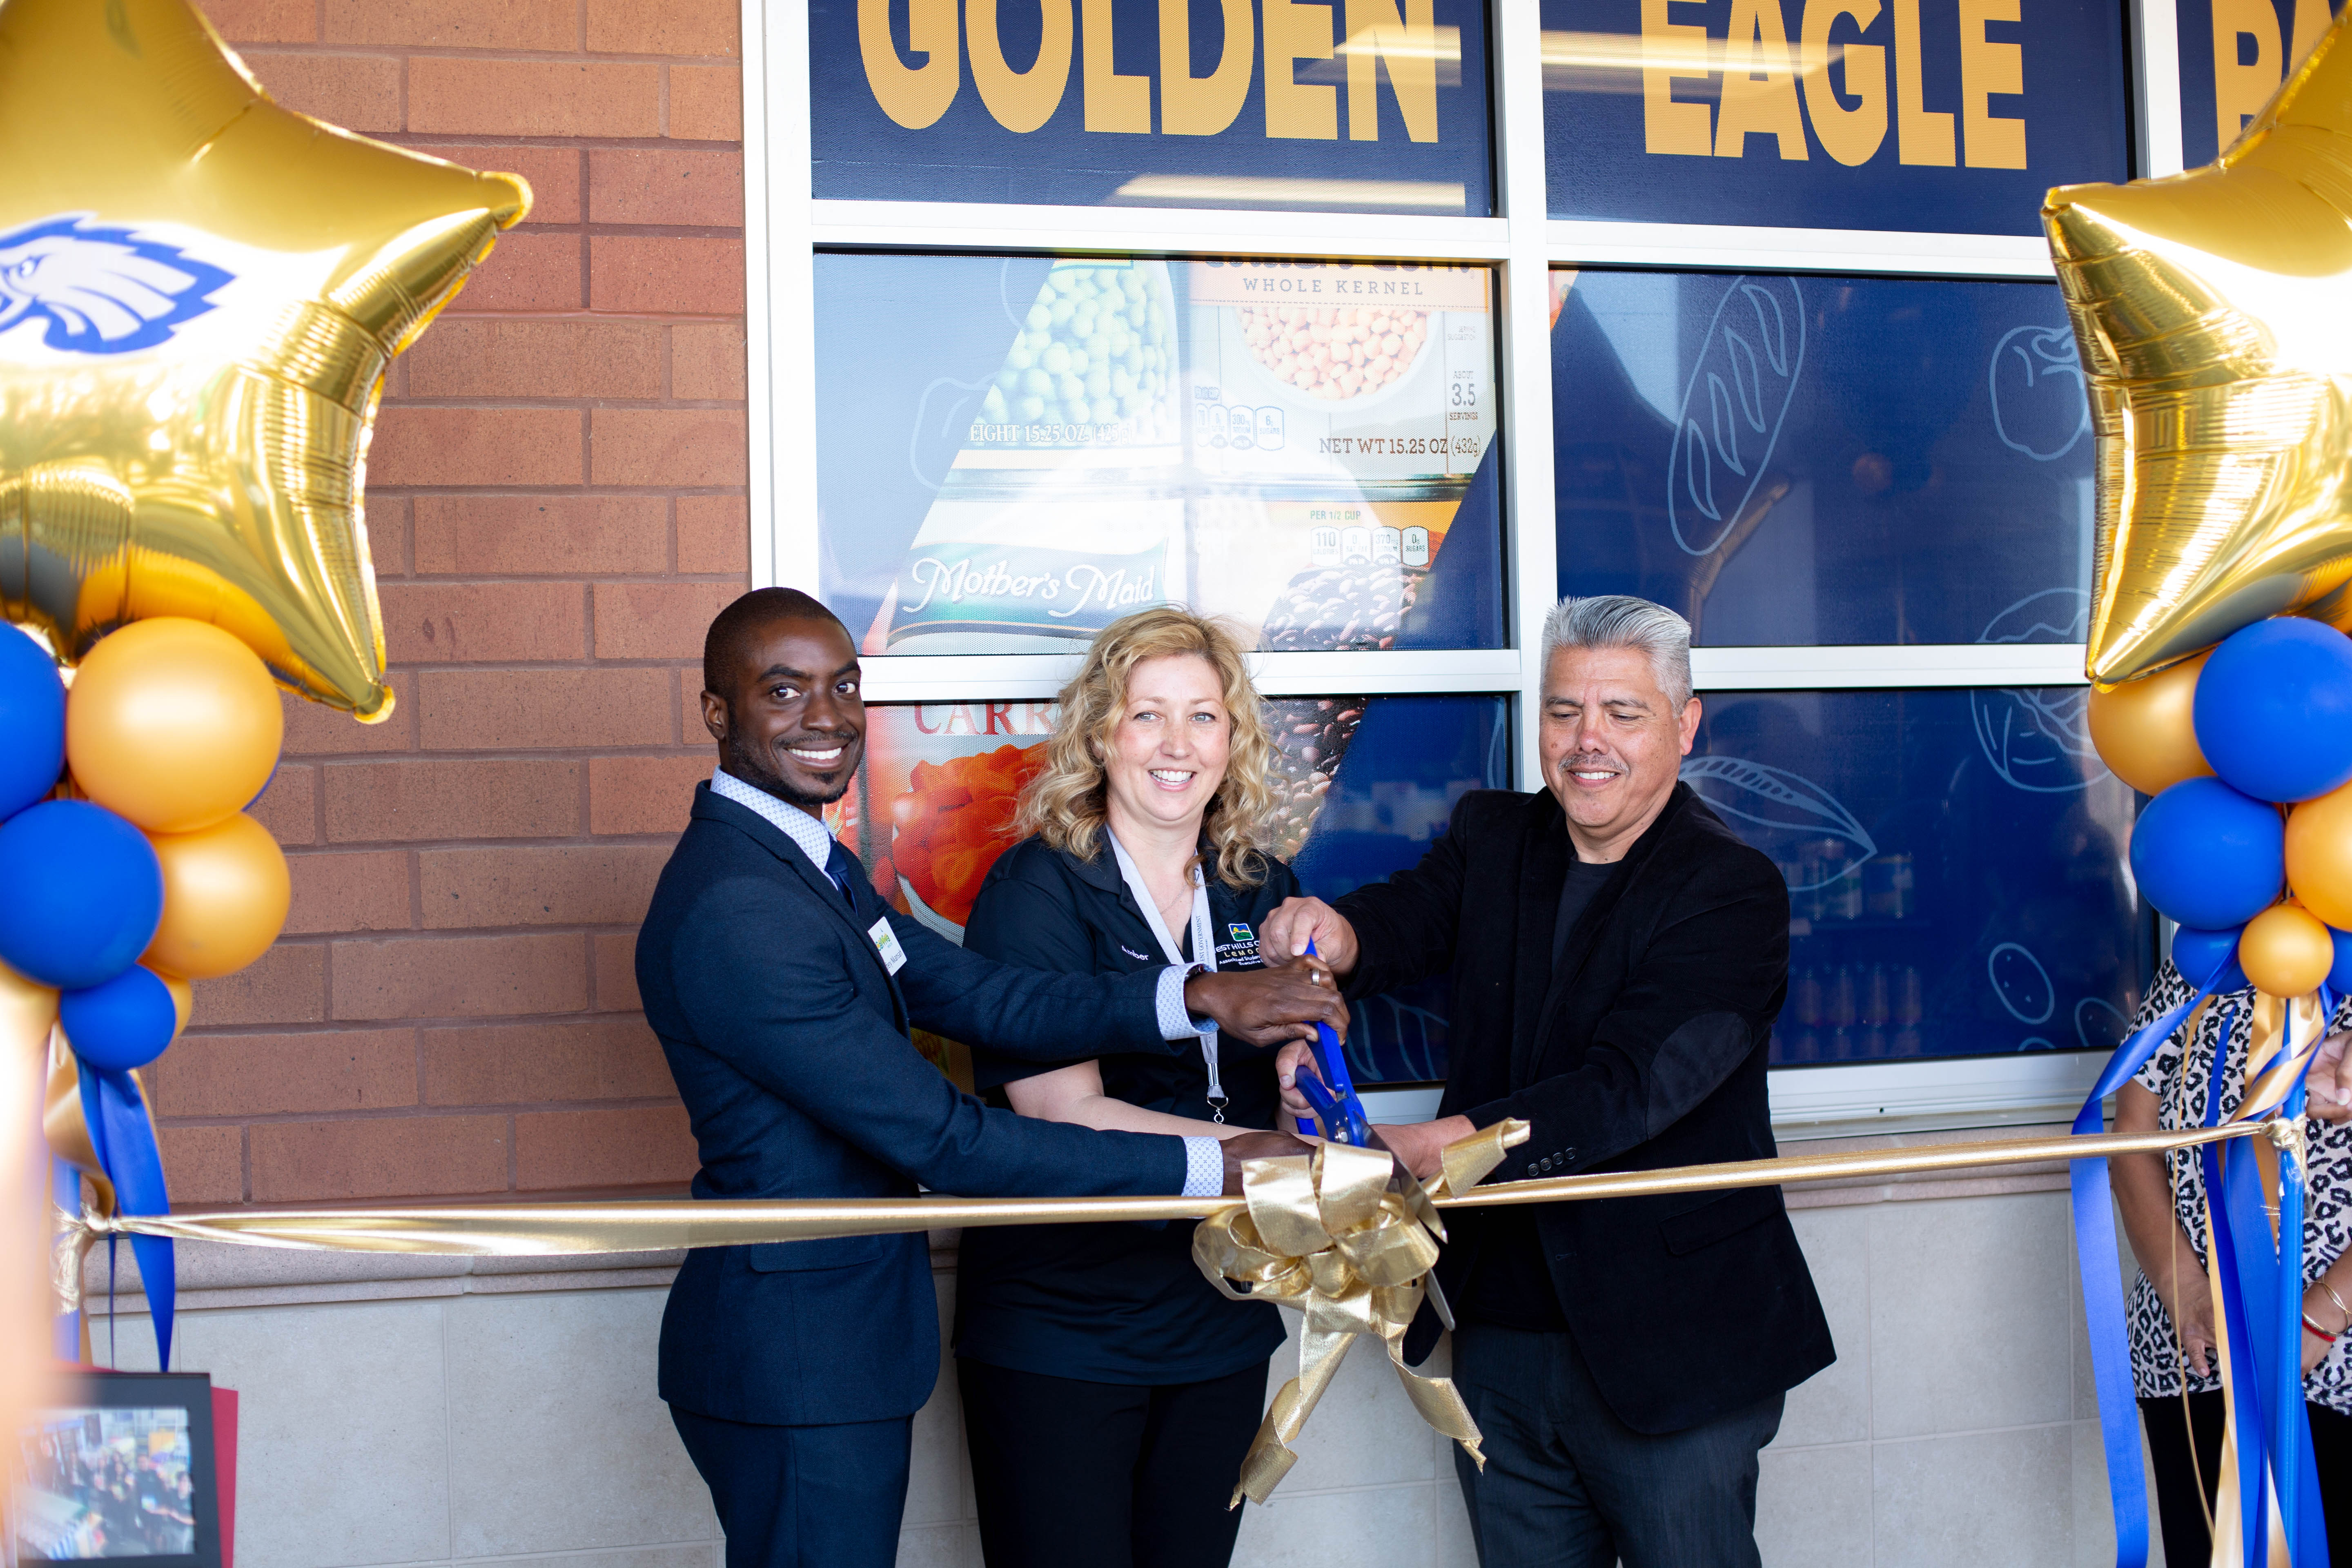 WHCL Golden Eagle Pantry Ribbon Cutting